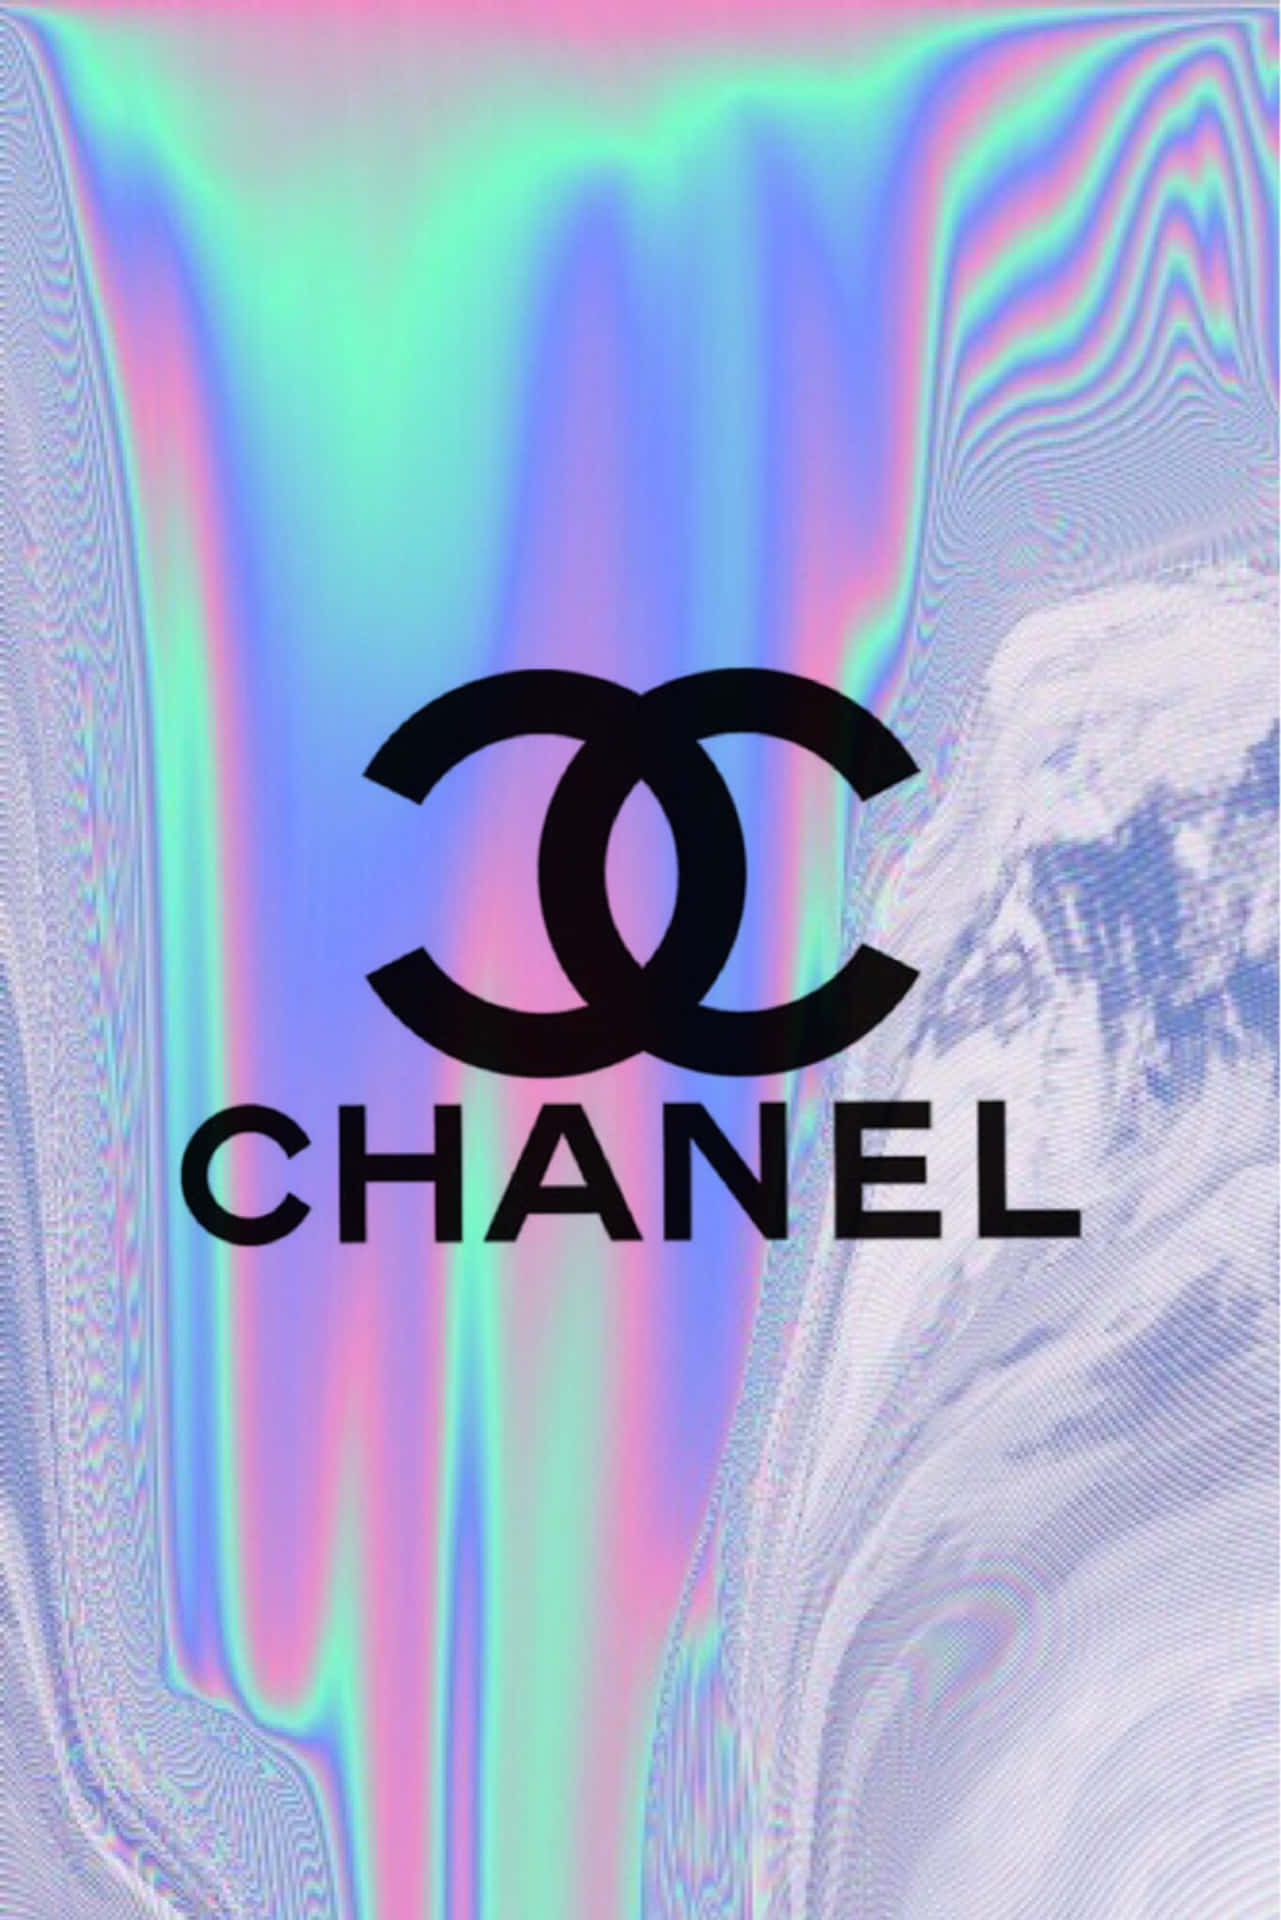 Chanel Logo On A Colorful Background